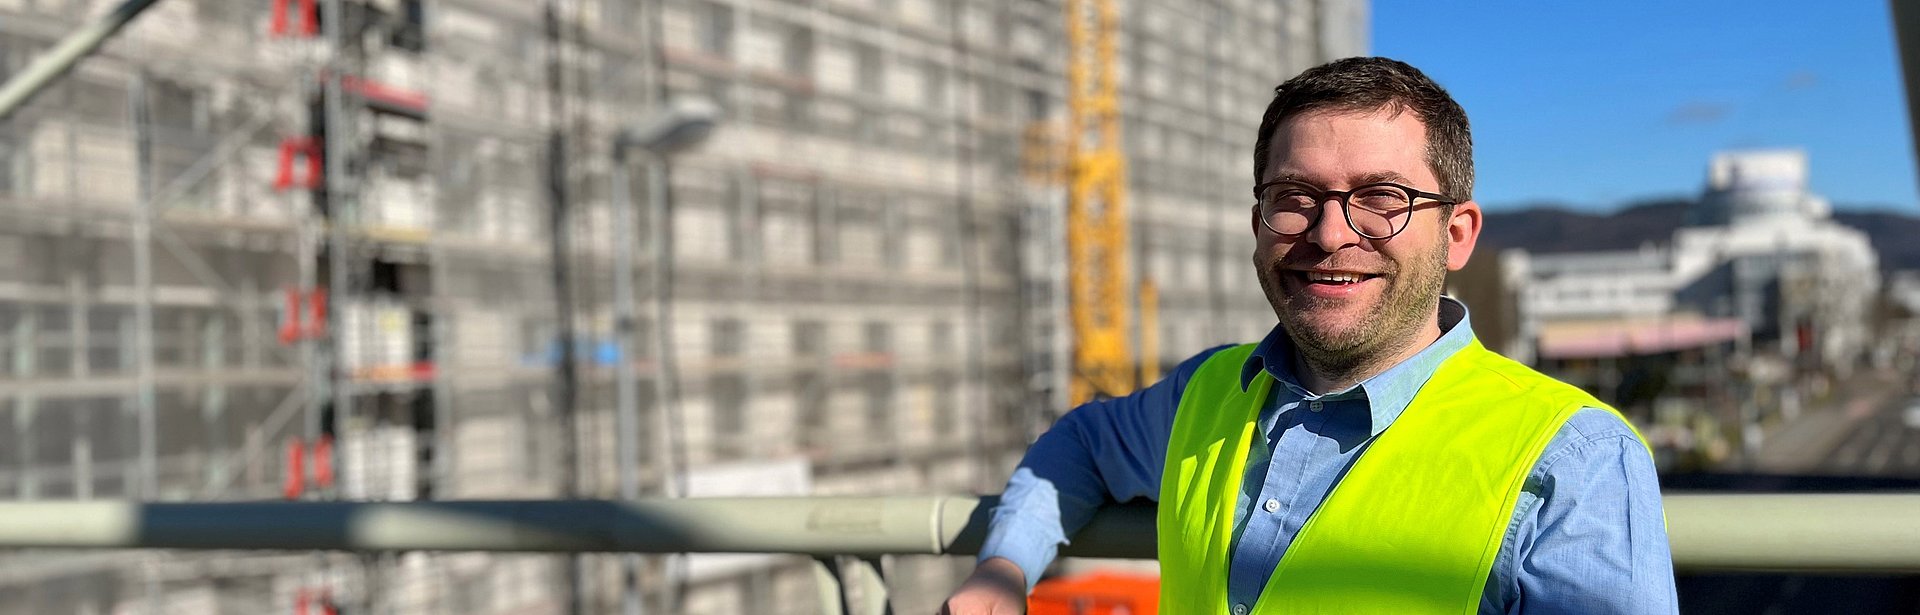 Markus Seidel stands in front of a construction project in io construction work vest